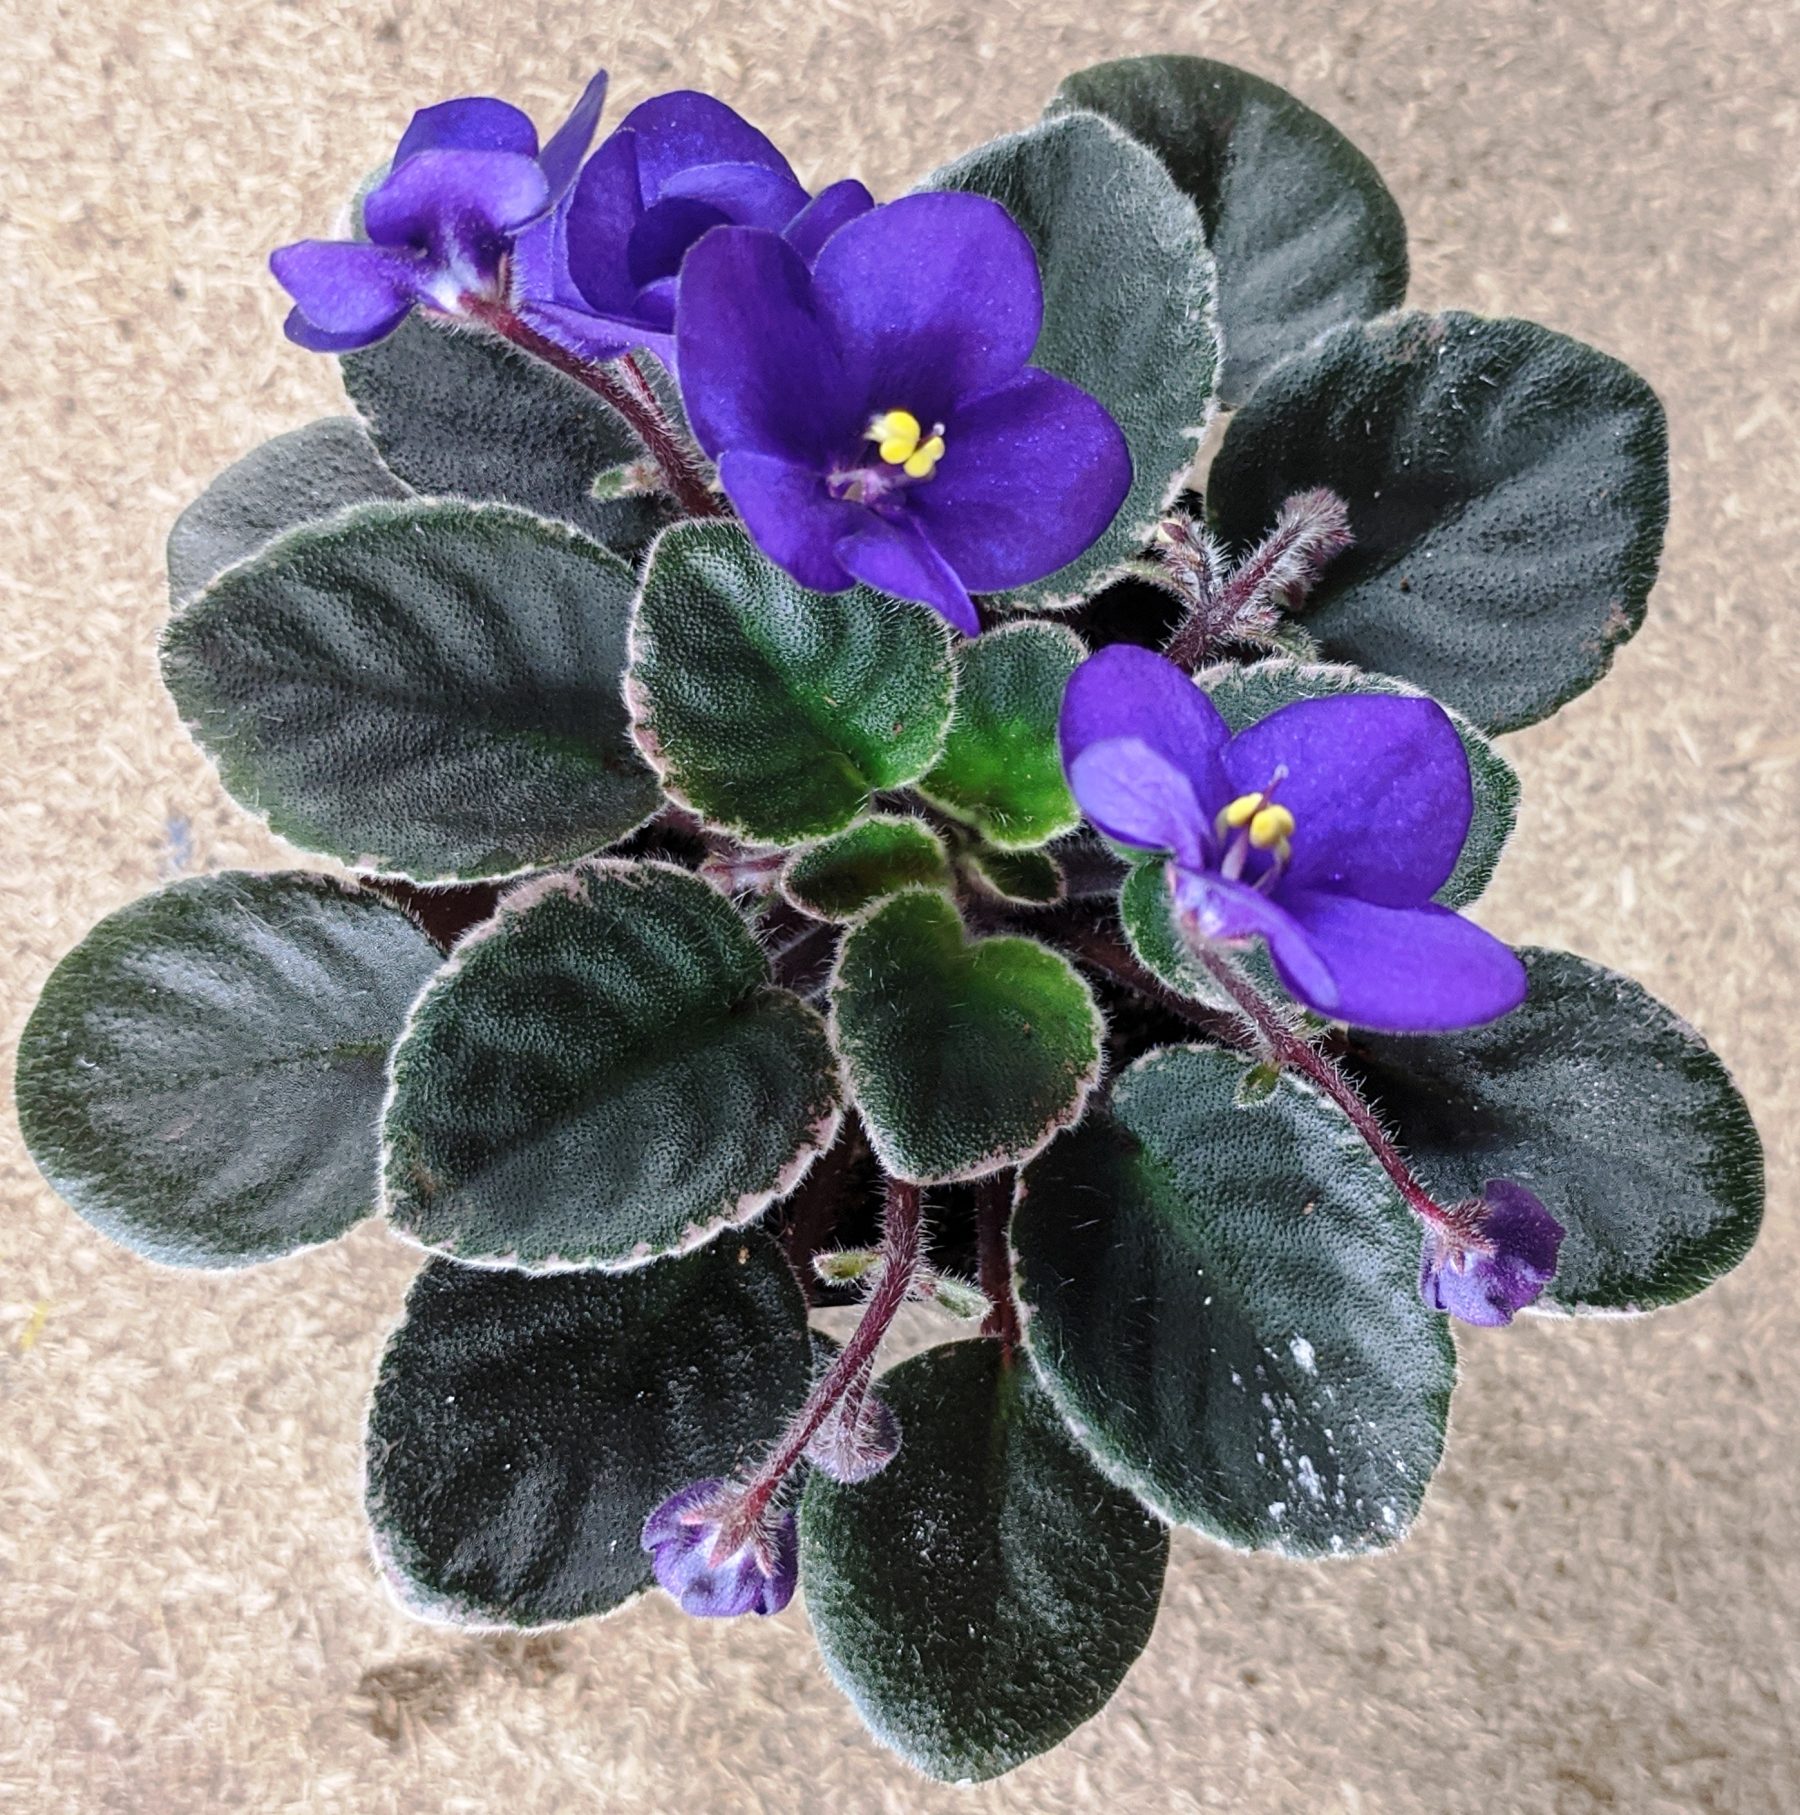 What To Do When Bringing Home A New African Violet Plant? Baby Violets